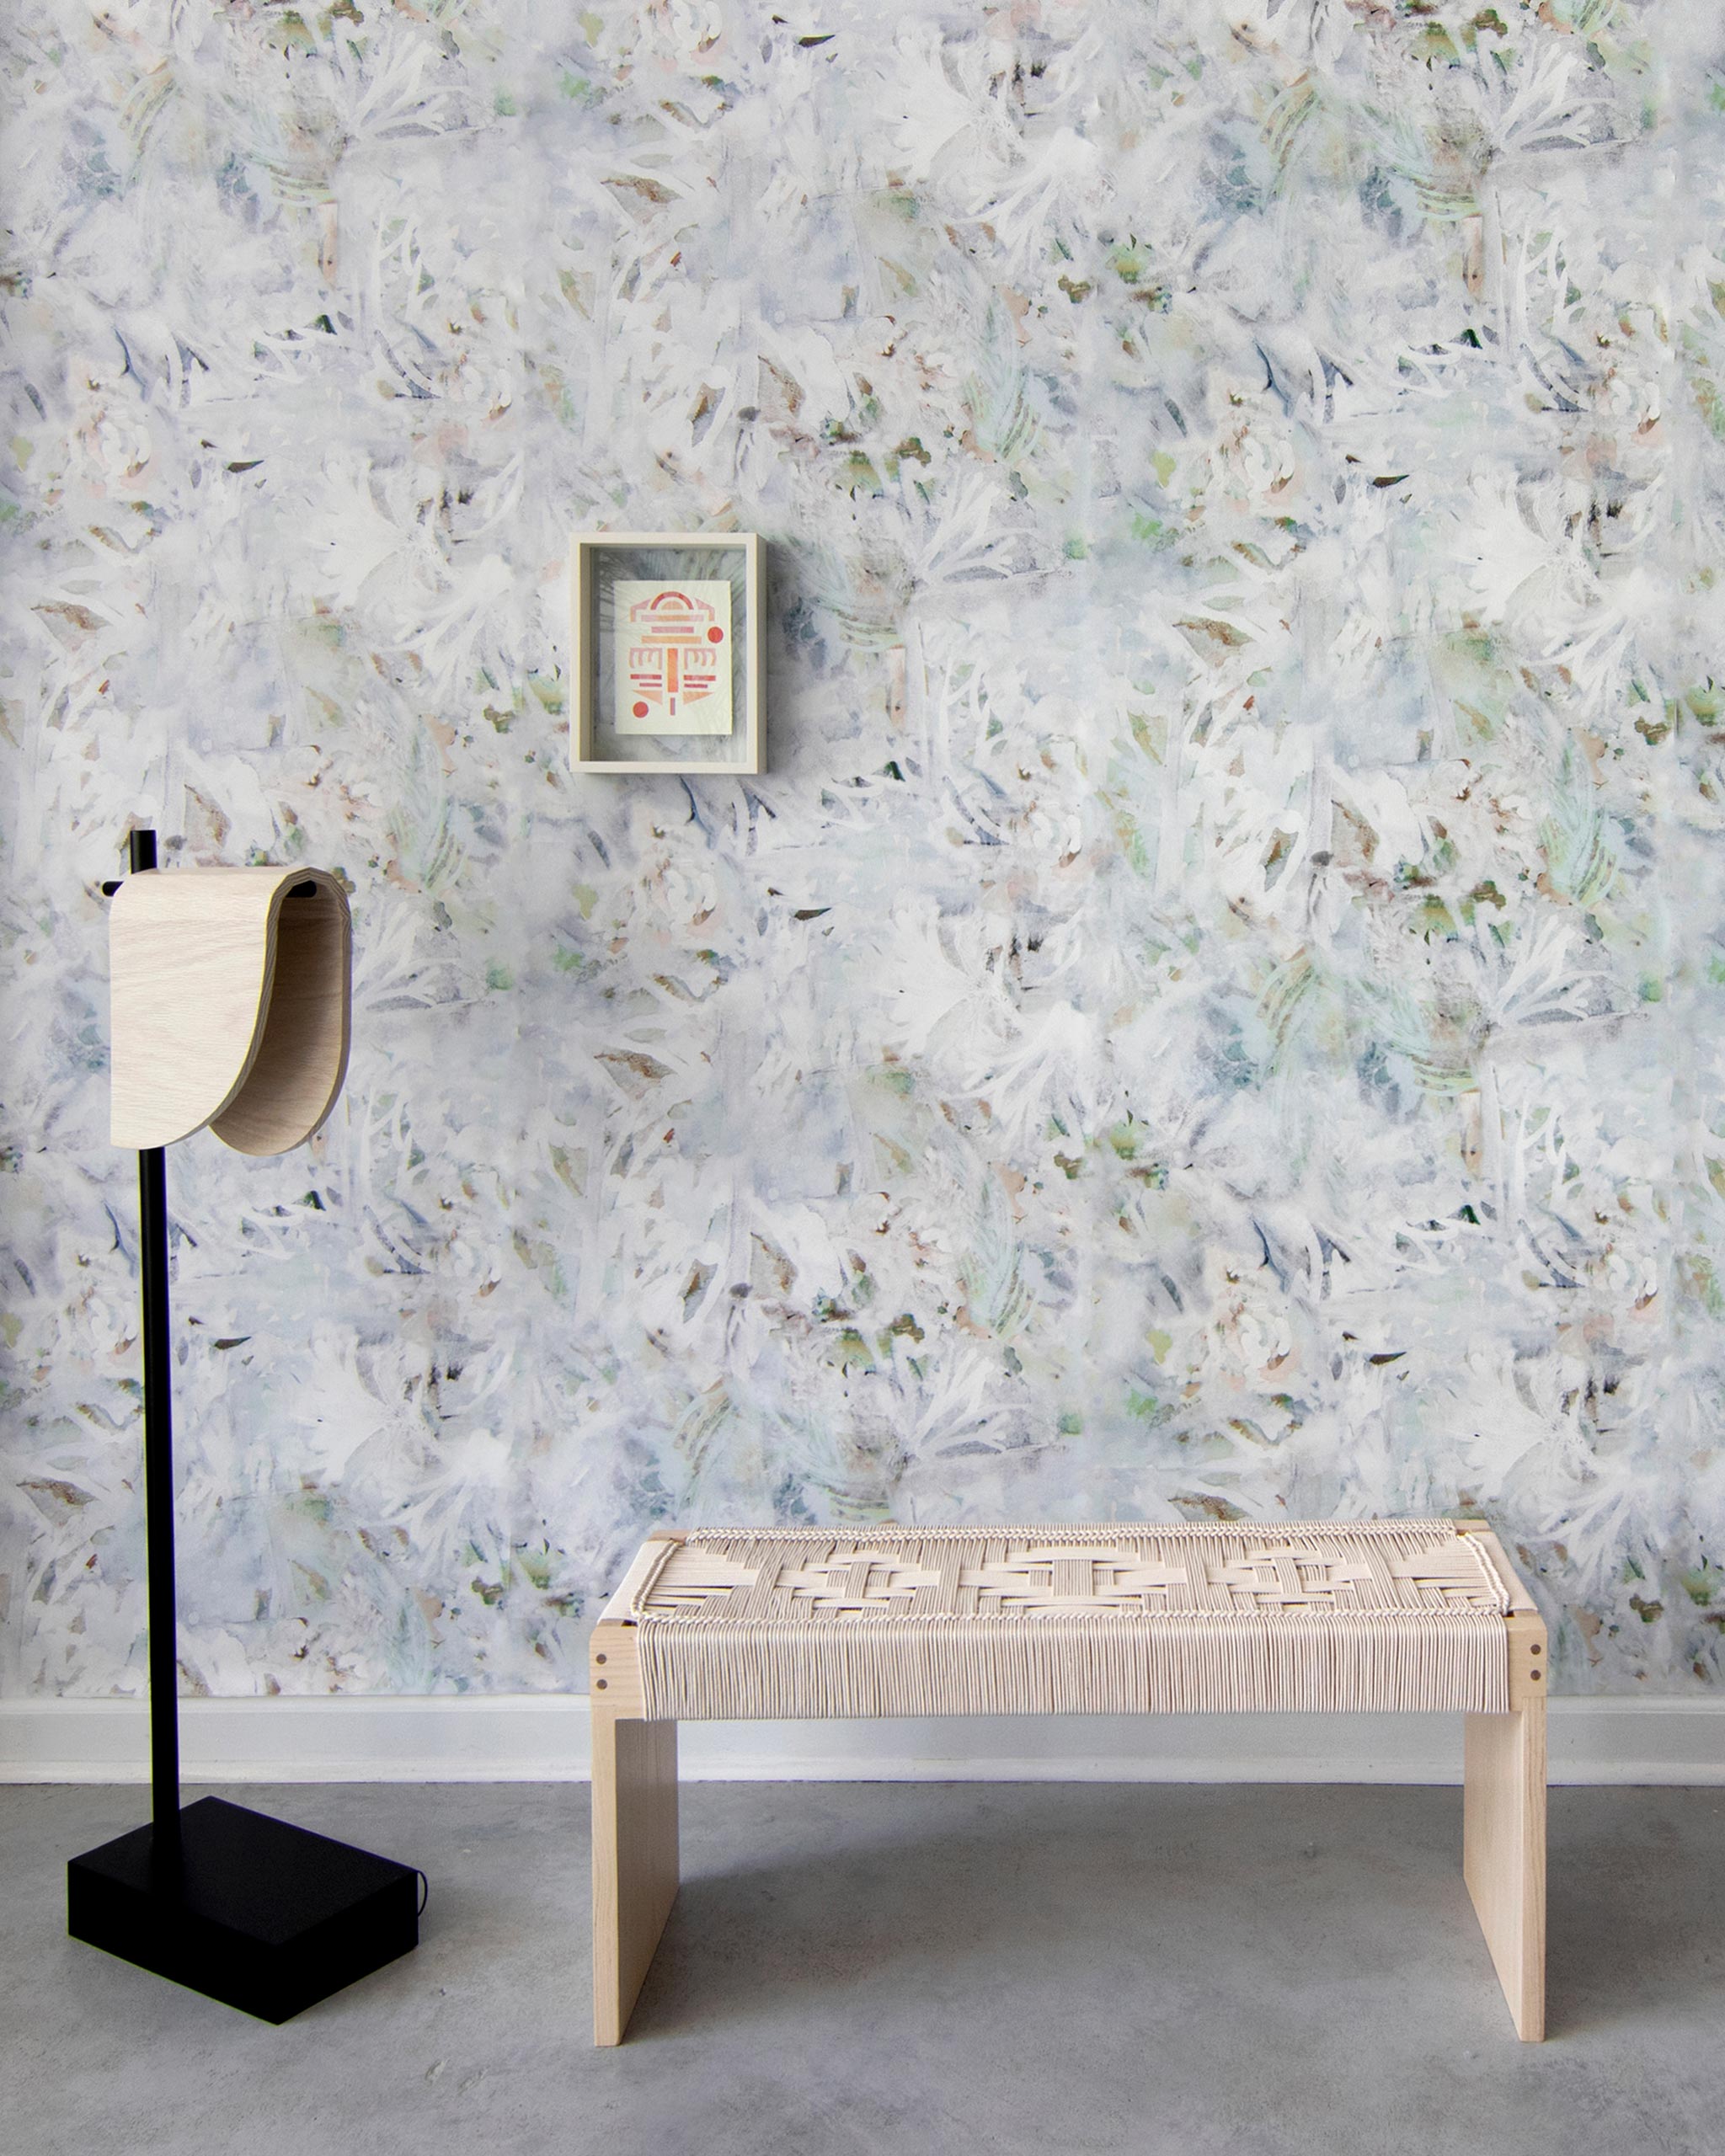 A modernist living tableau with a wall papered in an abstract painted print in blue, green, yellow and white.